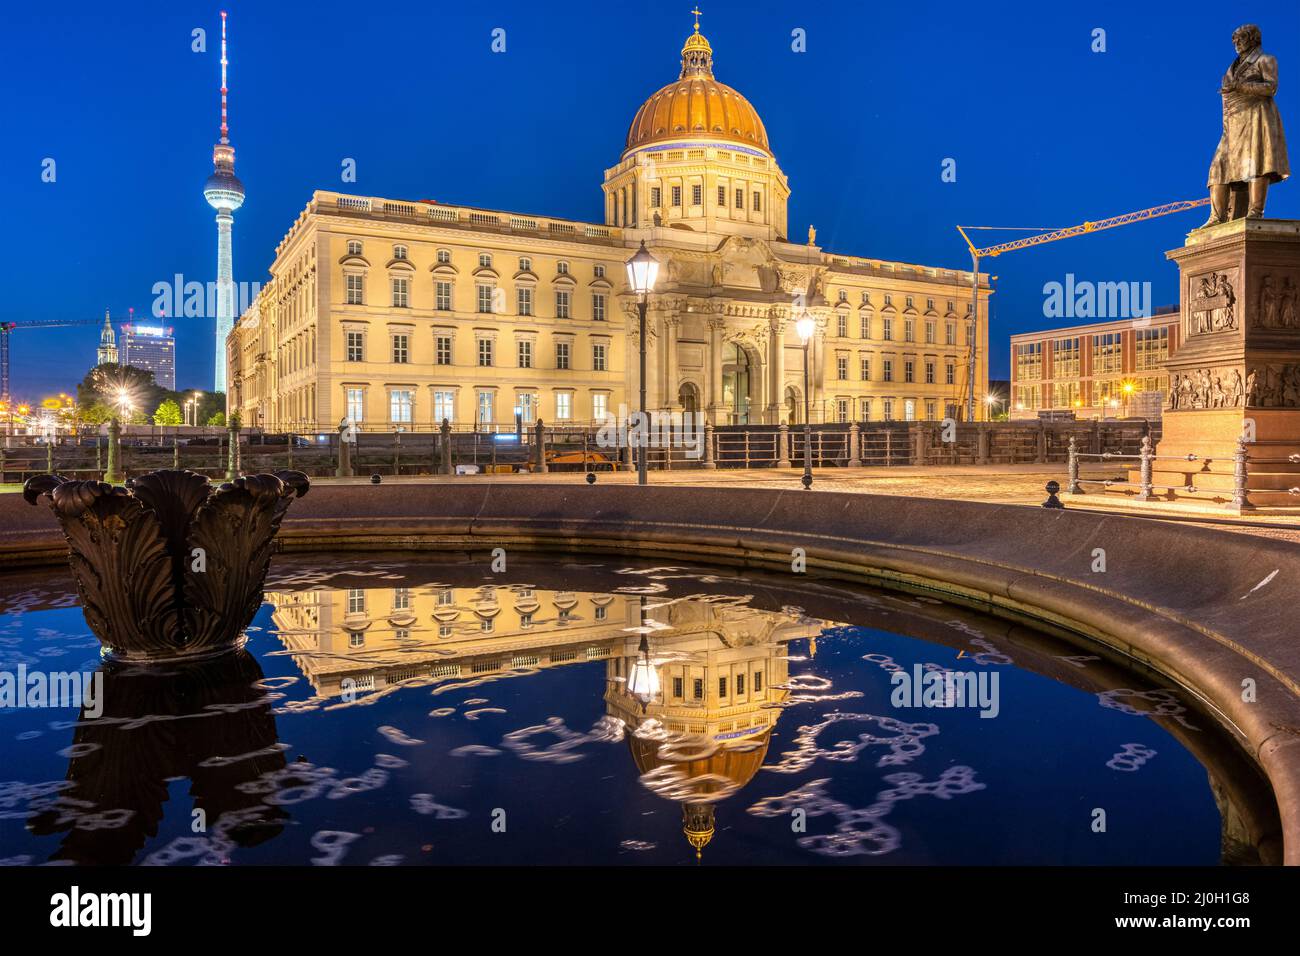 The reconstructed Berlin City Palace and the famous TV Tower at night Stock Photo